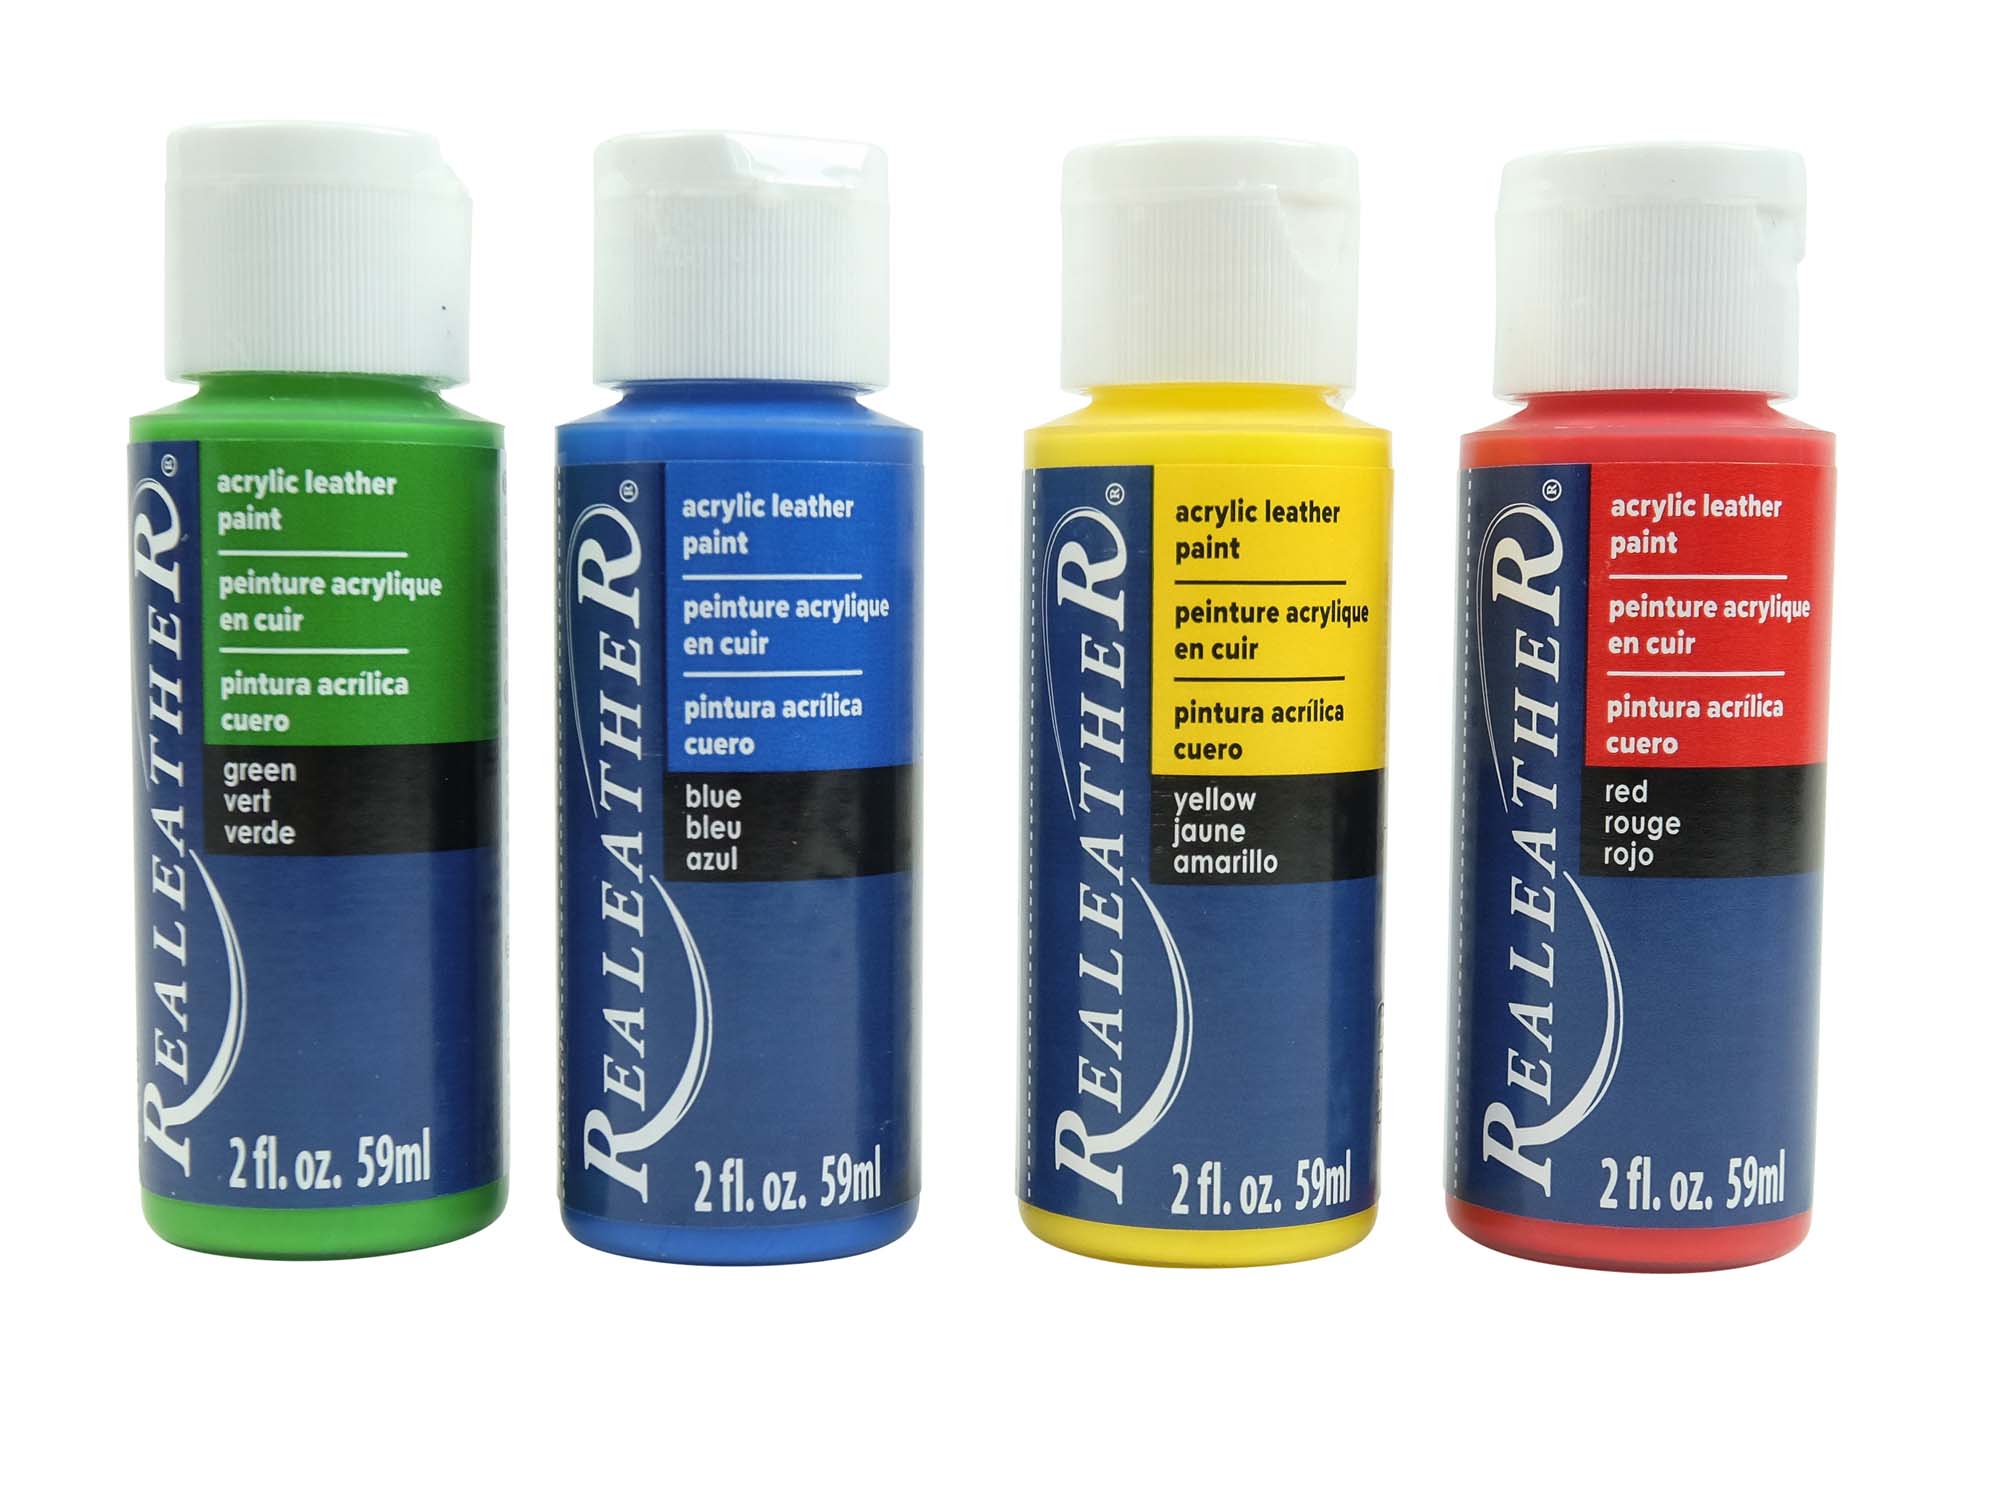 4-Pack of Acrylic Leather Paint: Primary Colors 4 pack of acrylic leather paints, real leather paints